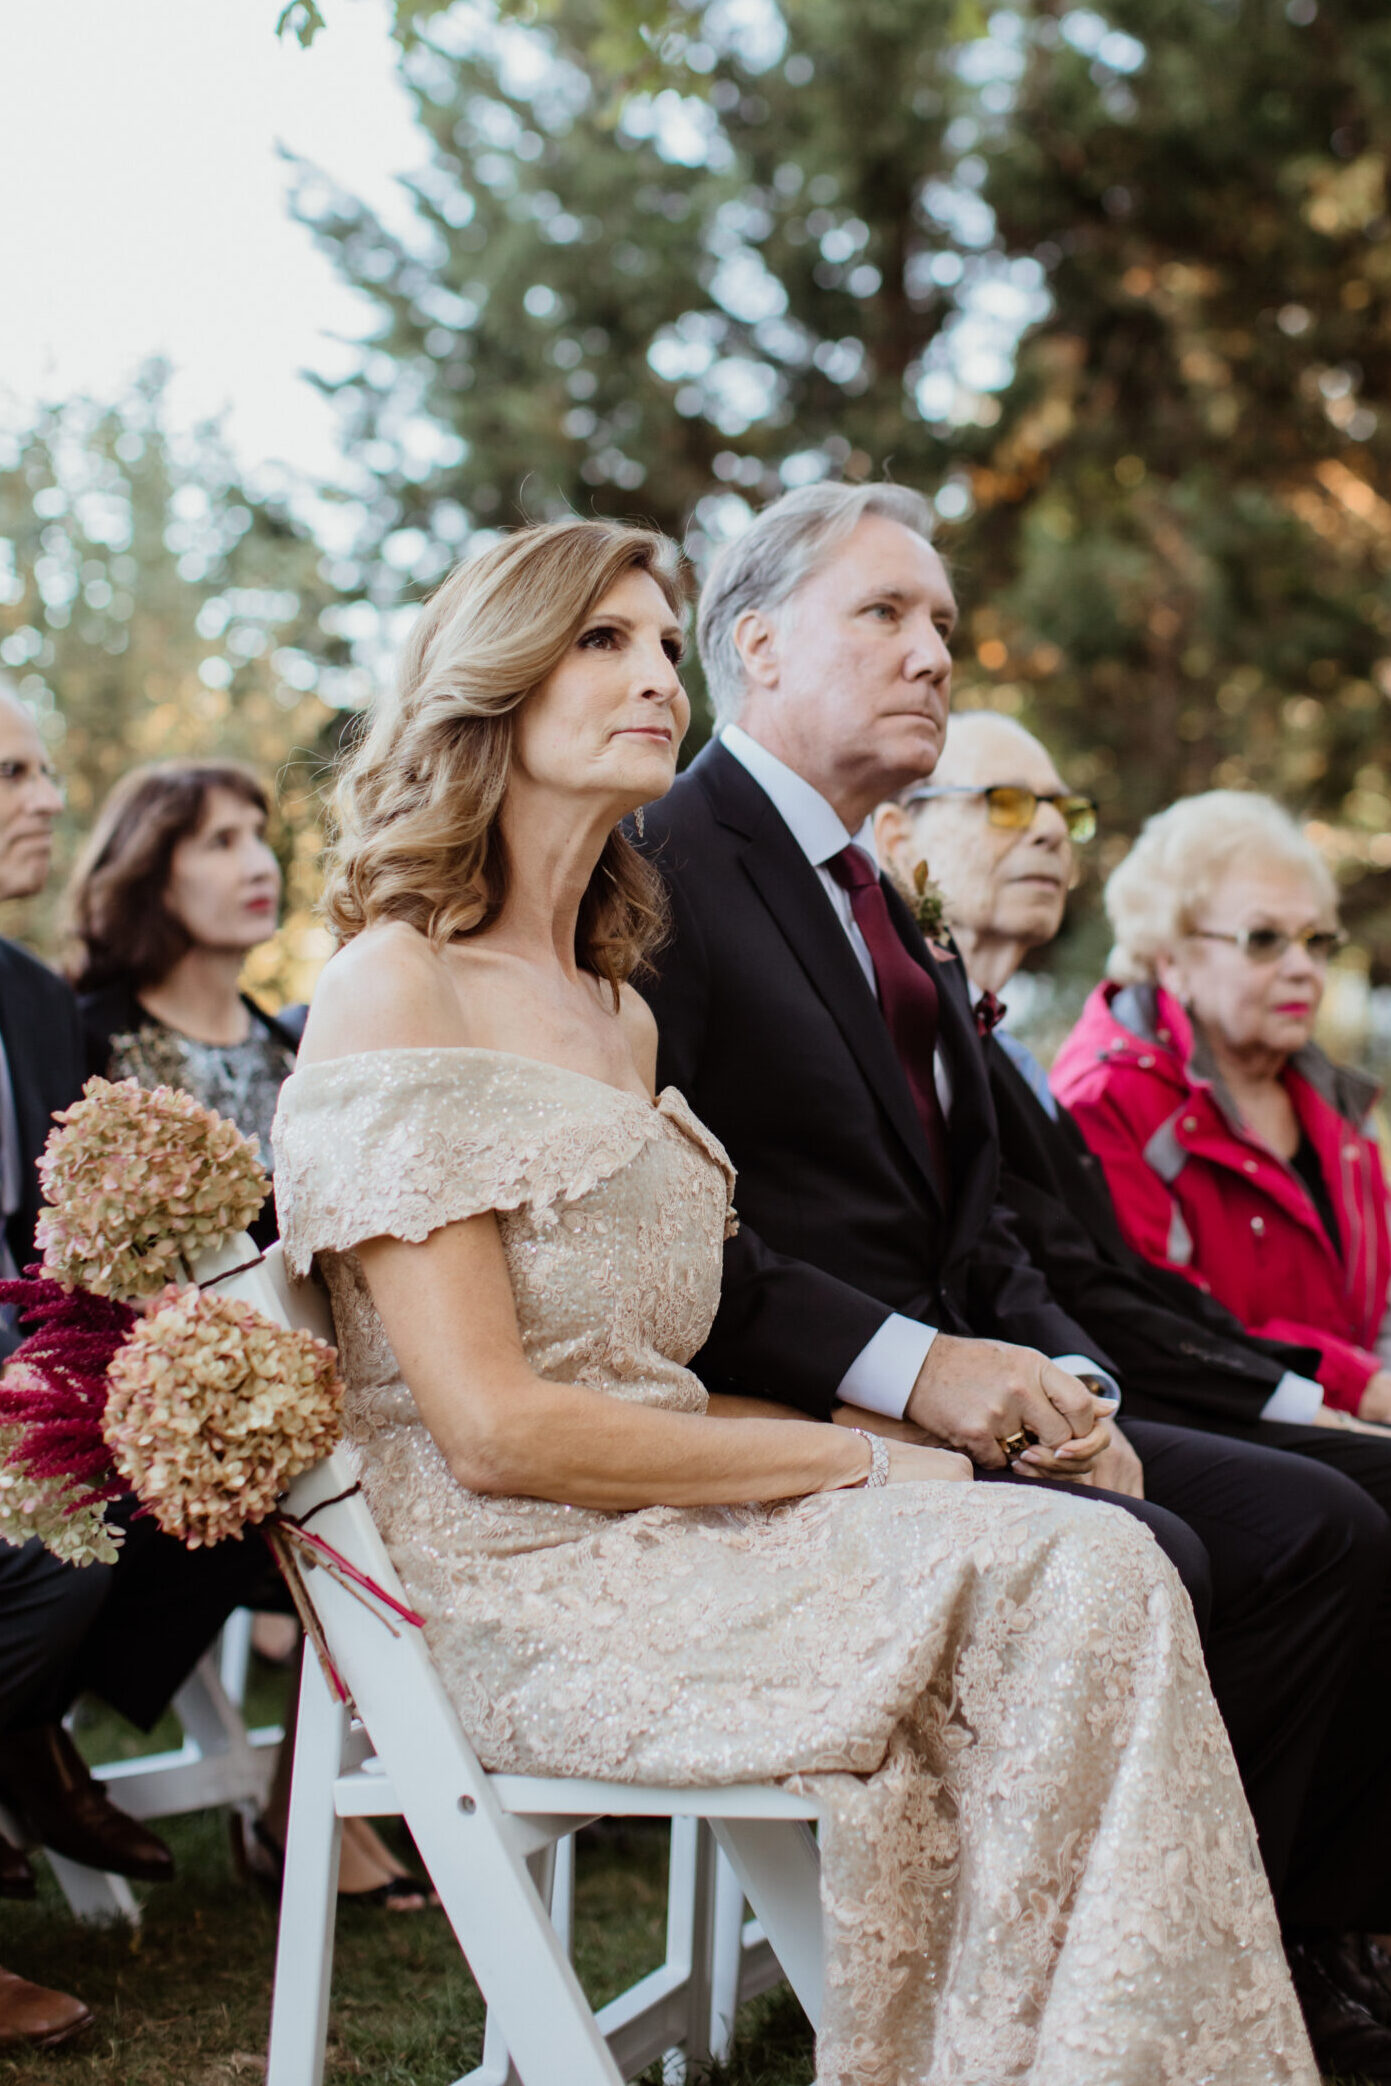 Guests watch the stunning Bedell winery wedding